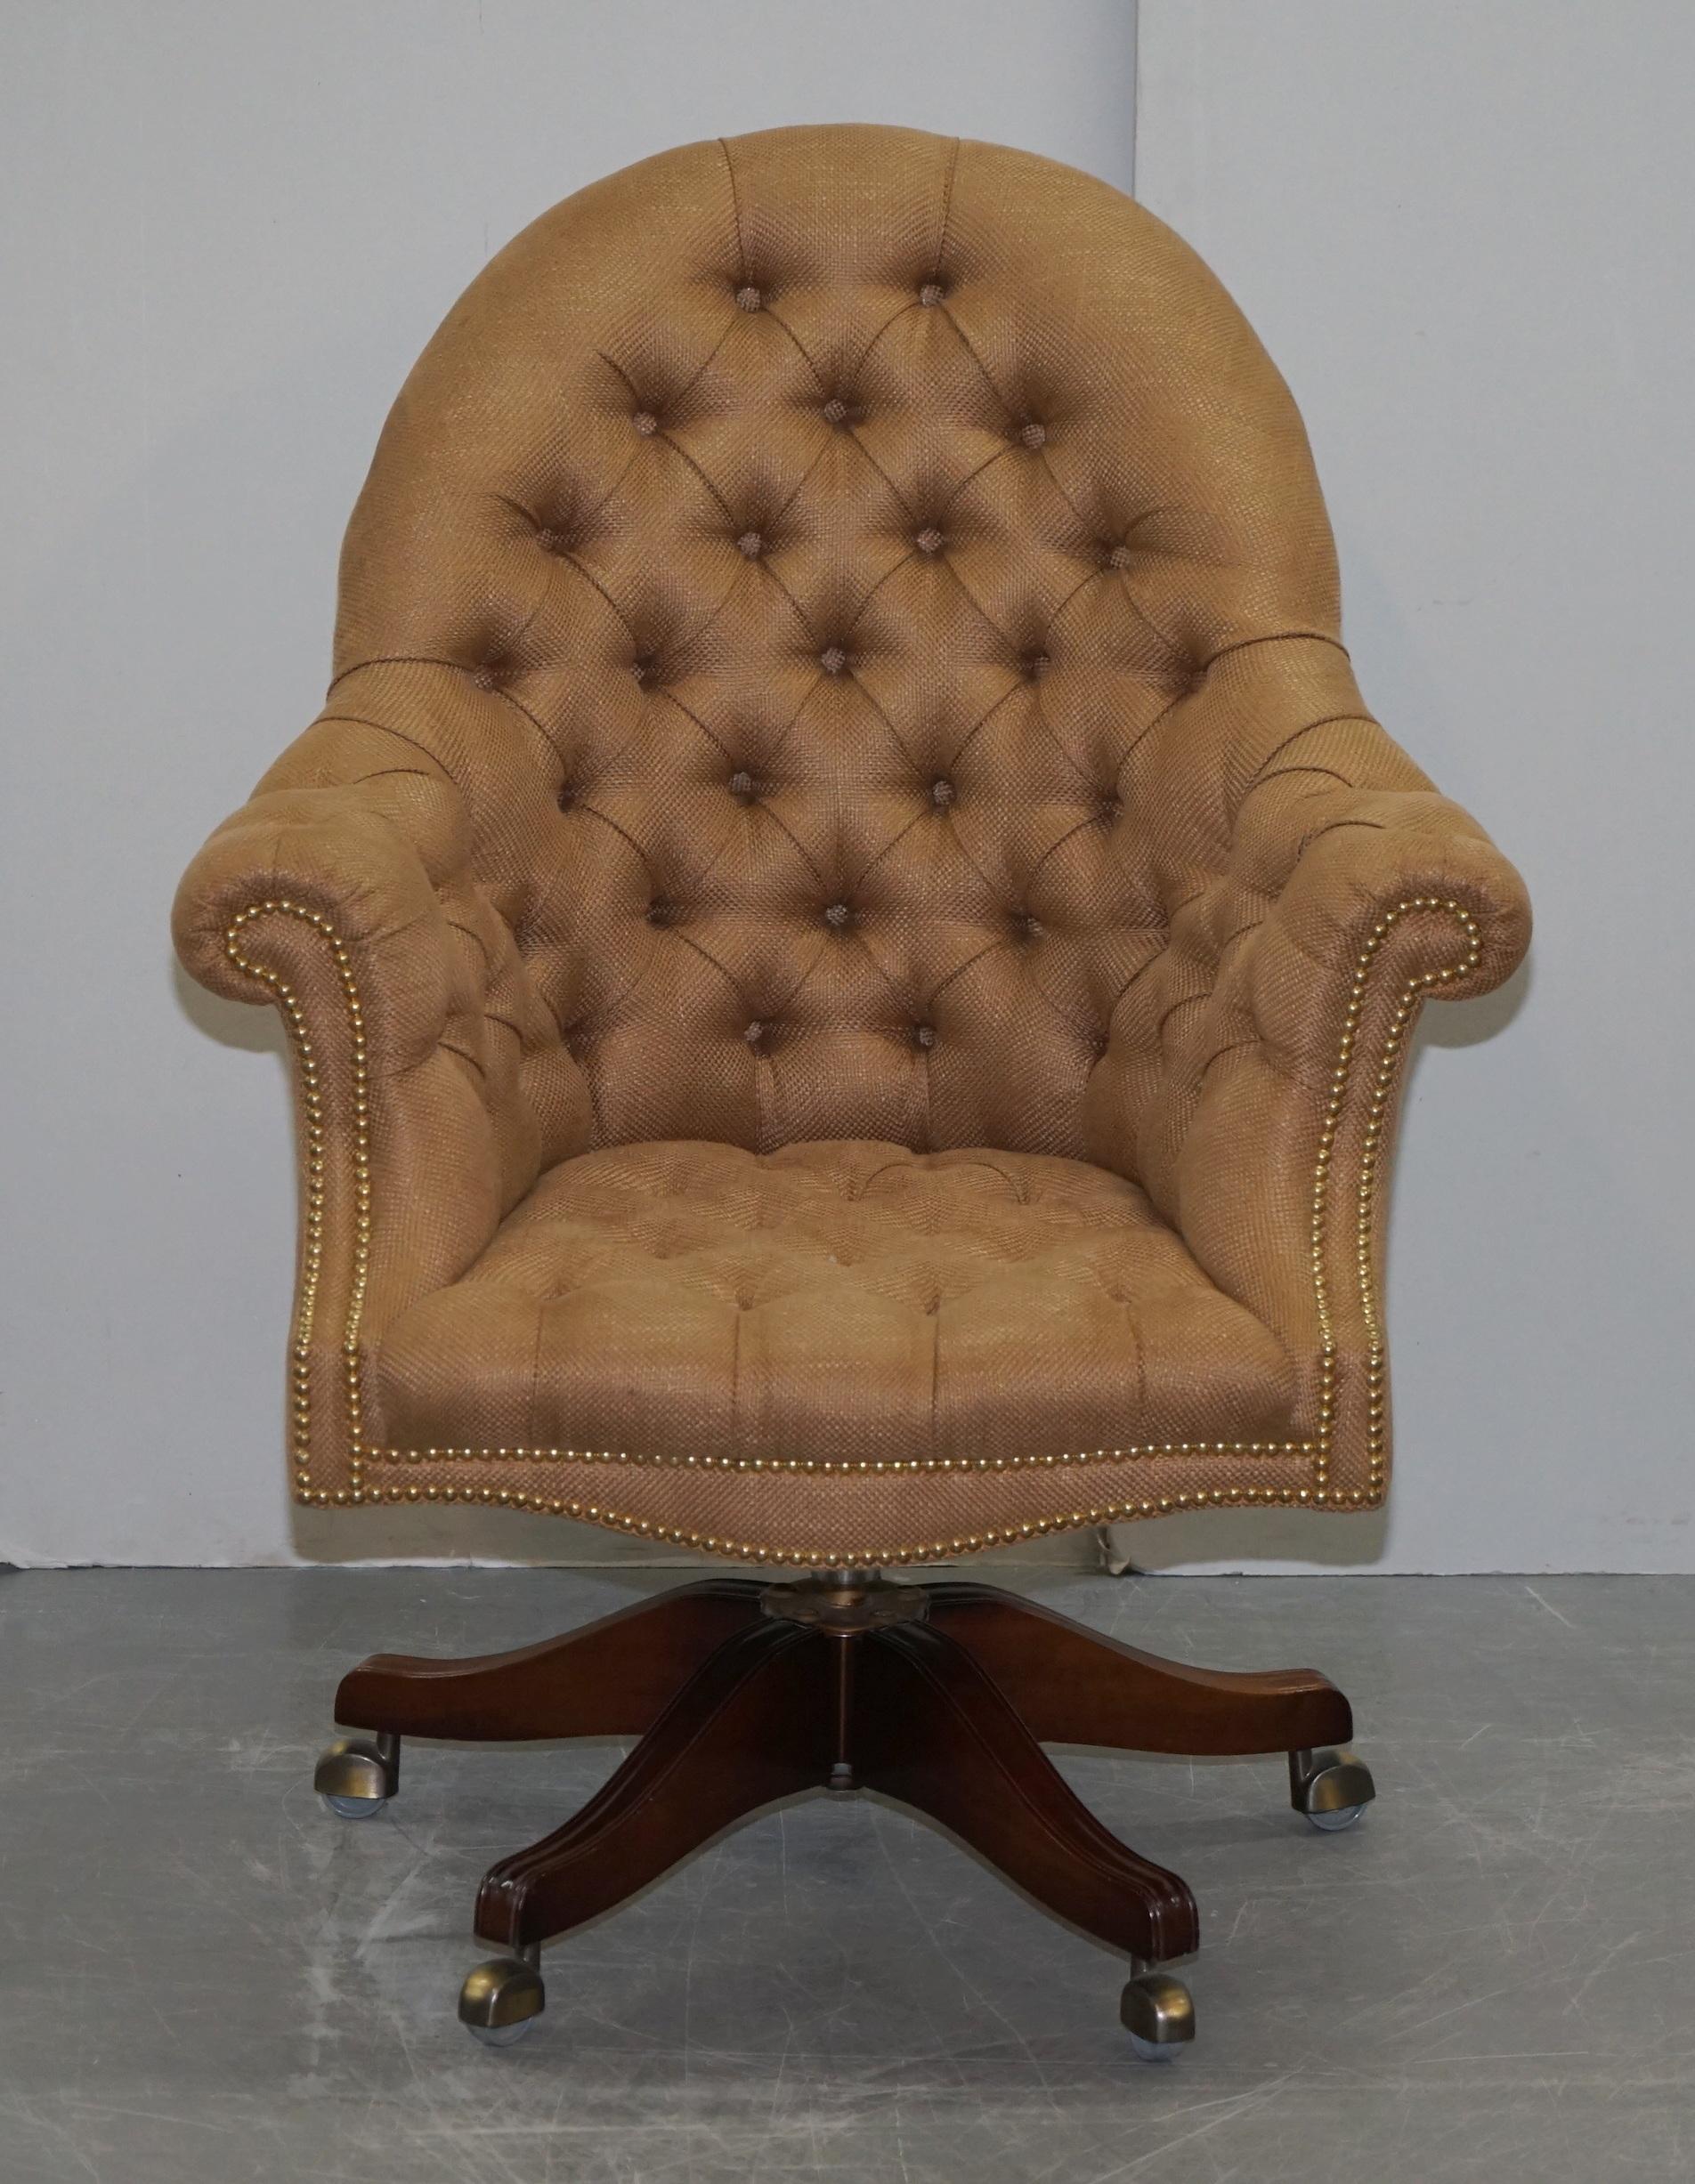 We are delighted to offer for sale this lovely one of a kind Chesterfield button Directors armchair upholstered in plush woven linen 

A very good looking well made and comfortable directors chair. This is the only one I have ever seen upholstered